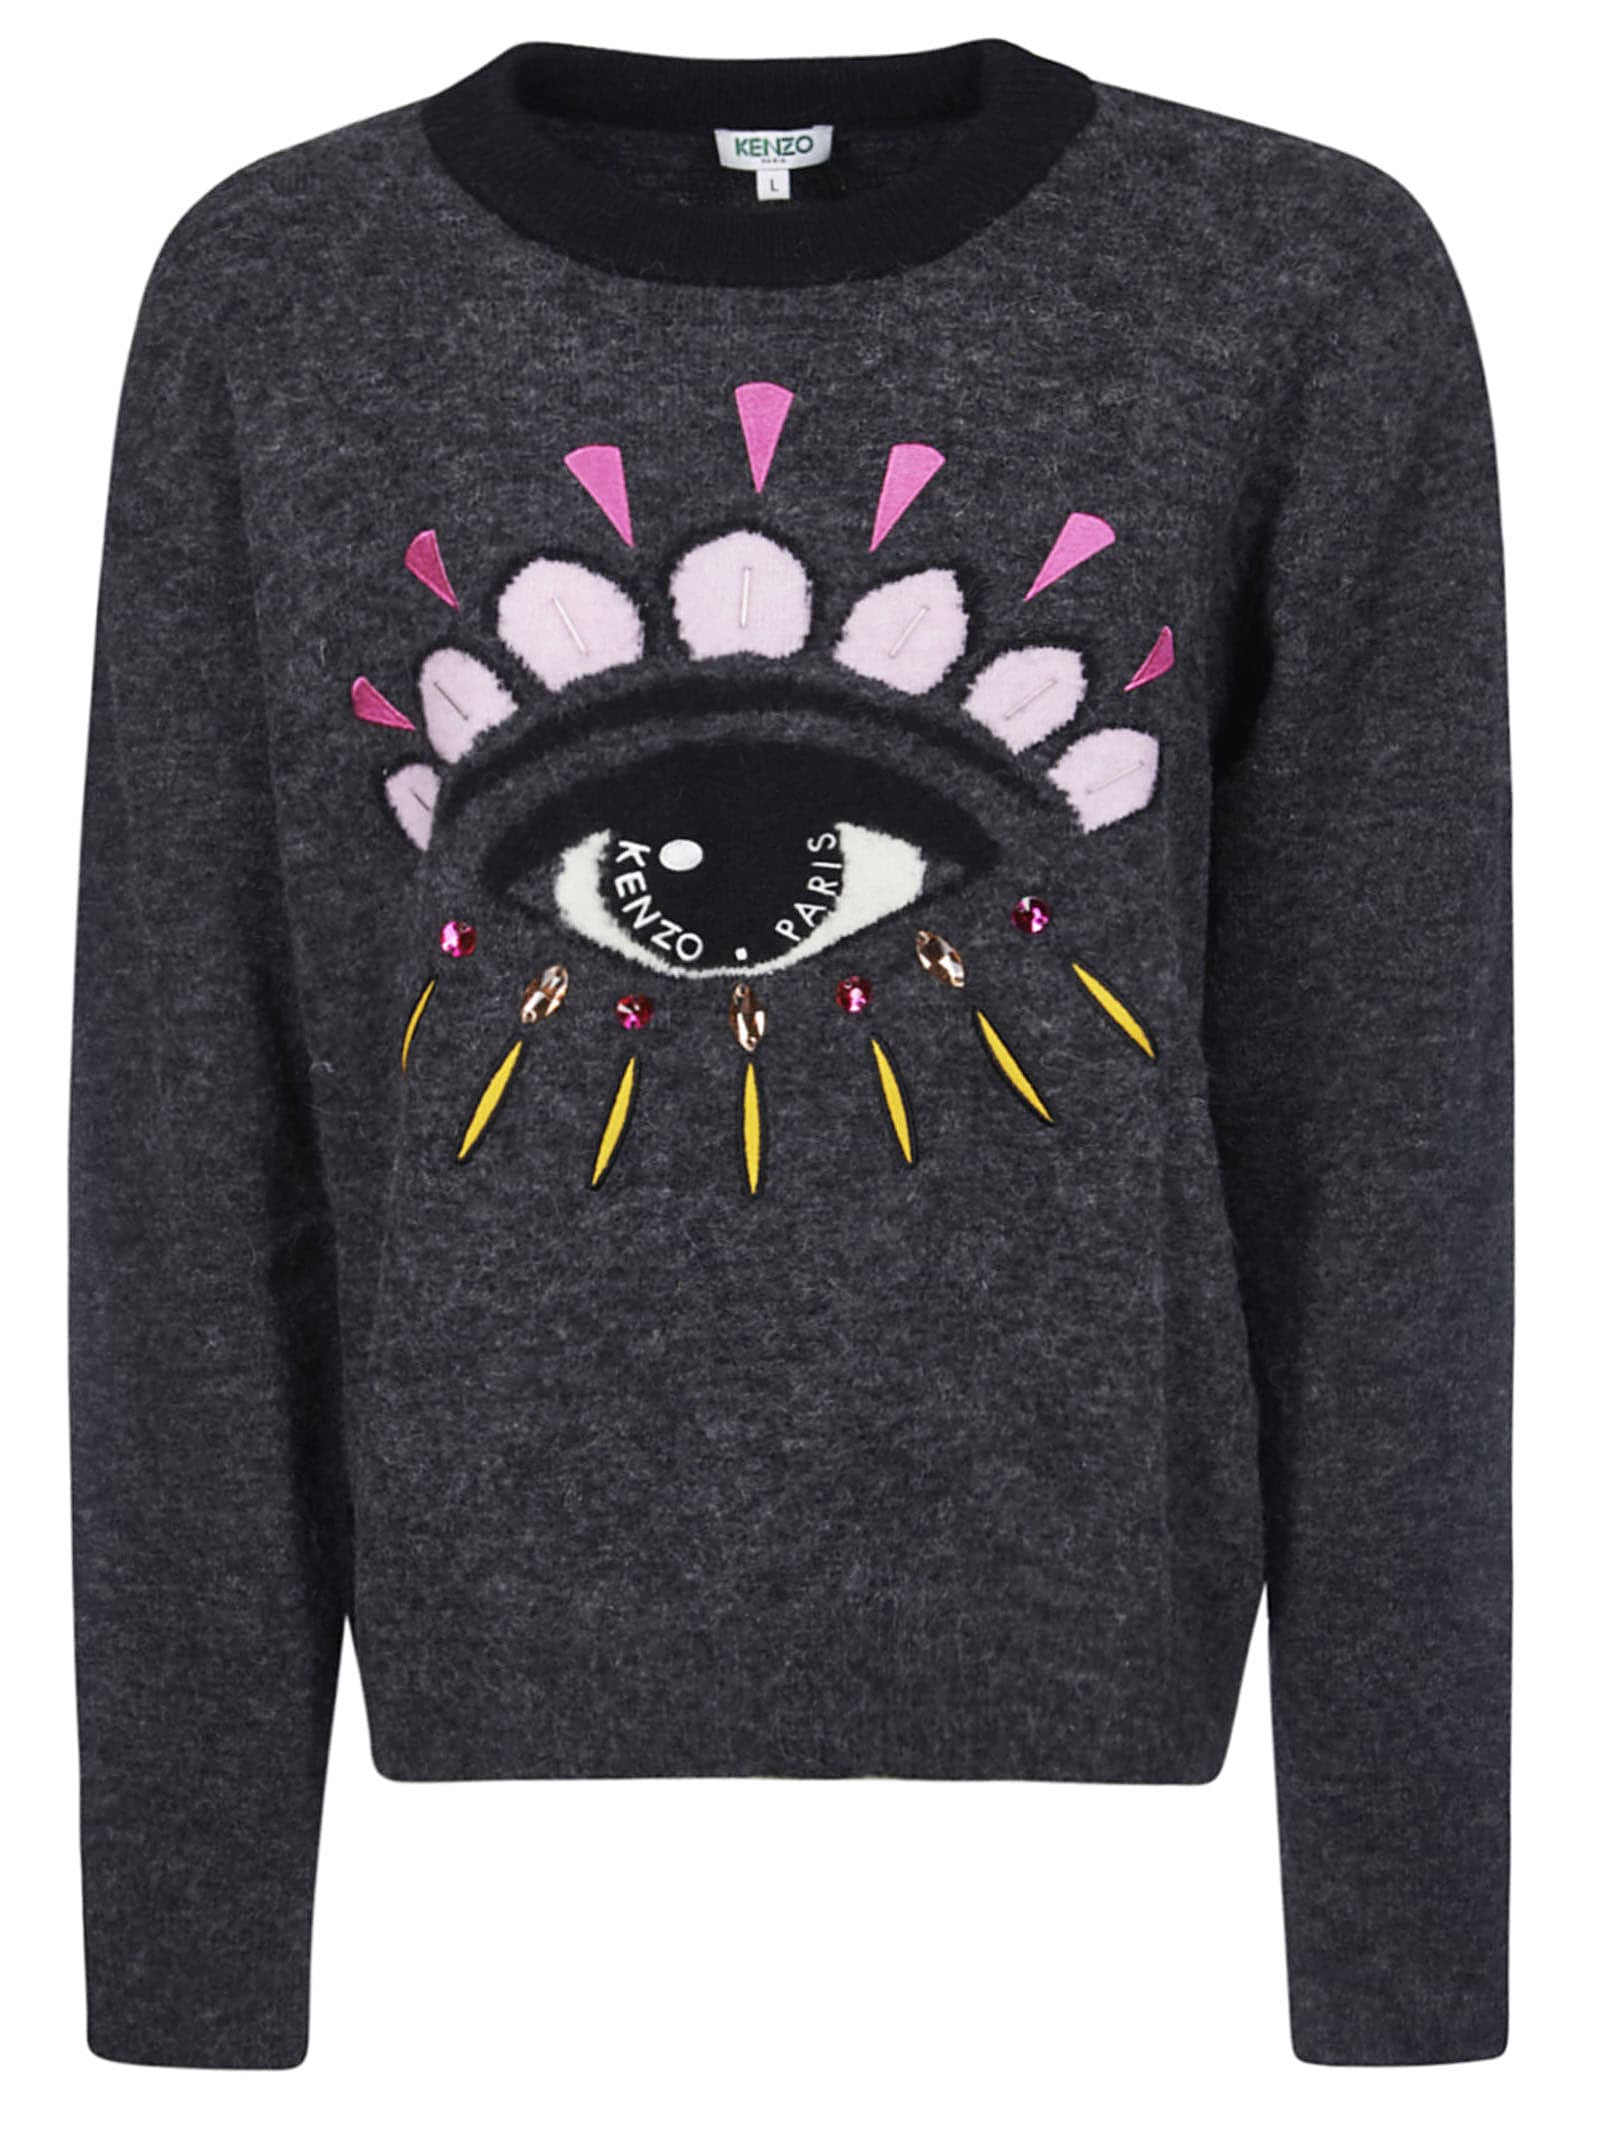 black and pink kenzo jumper